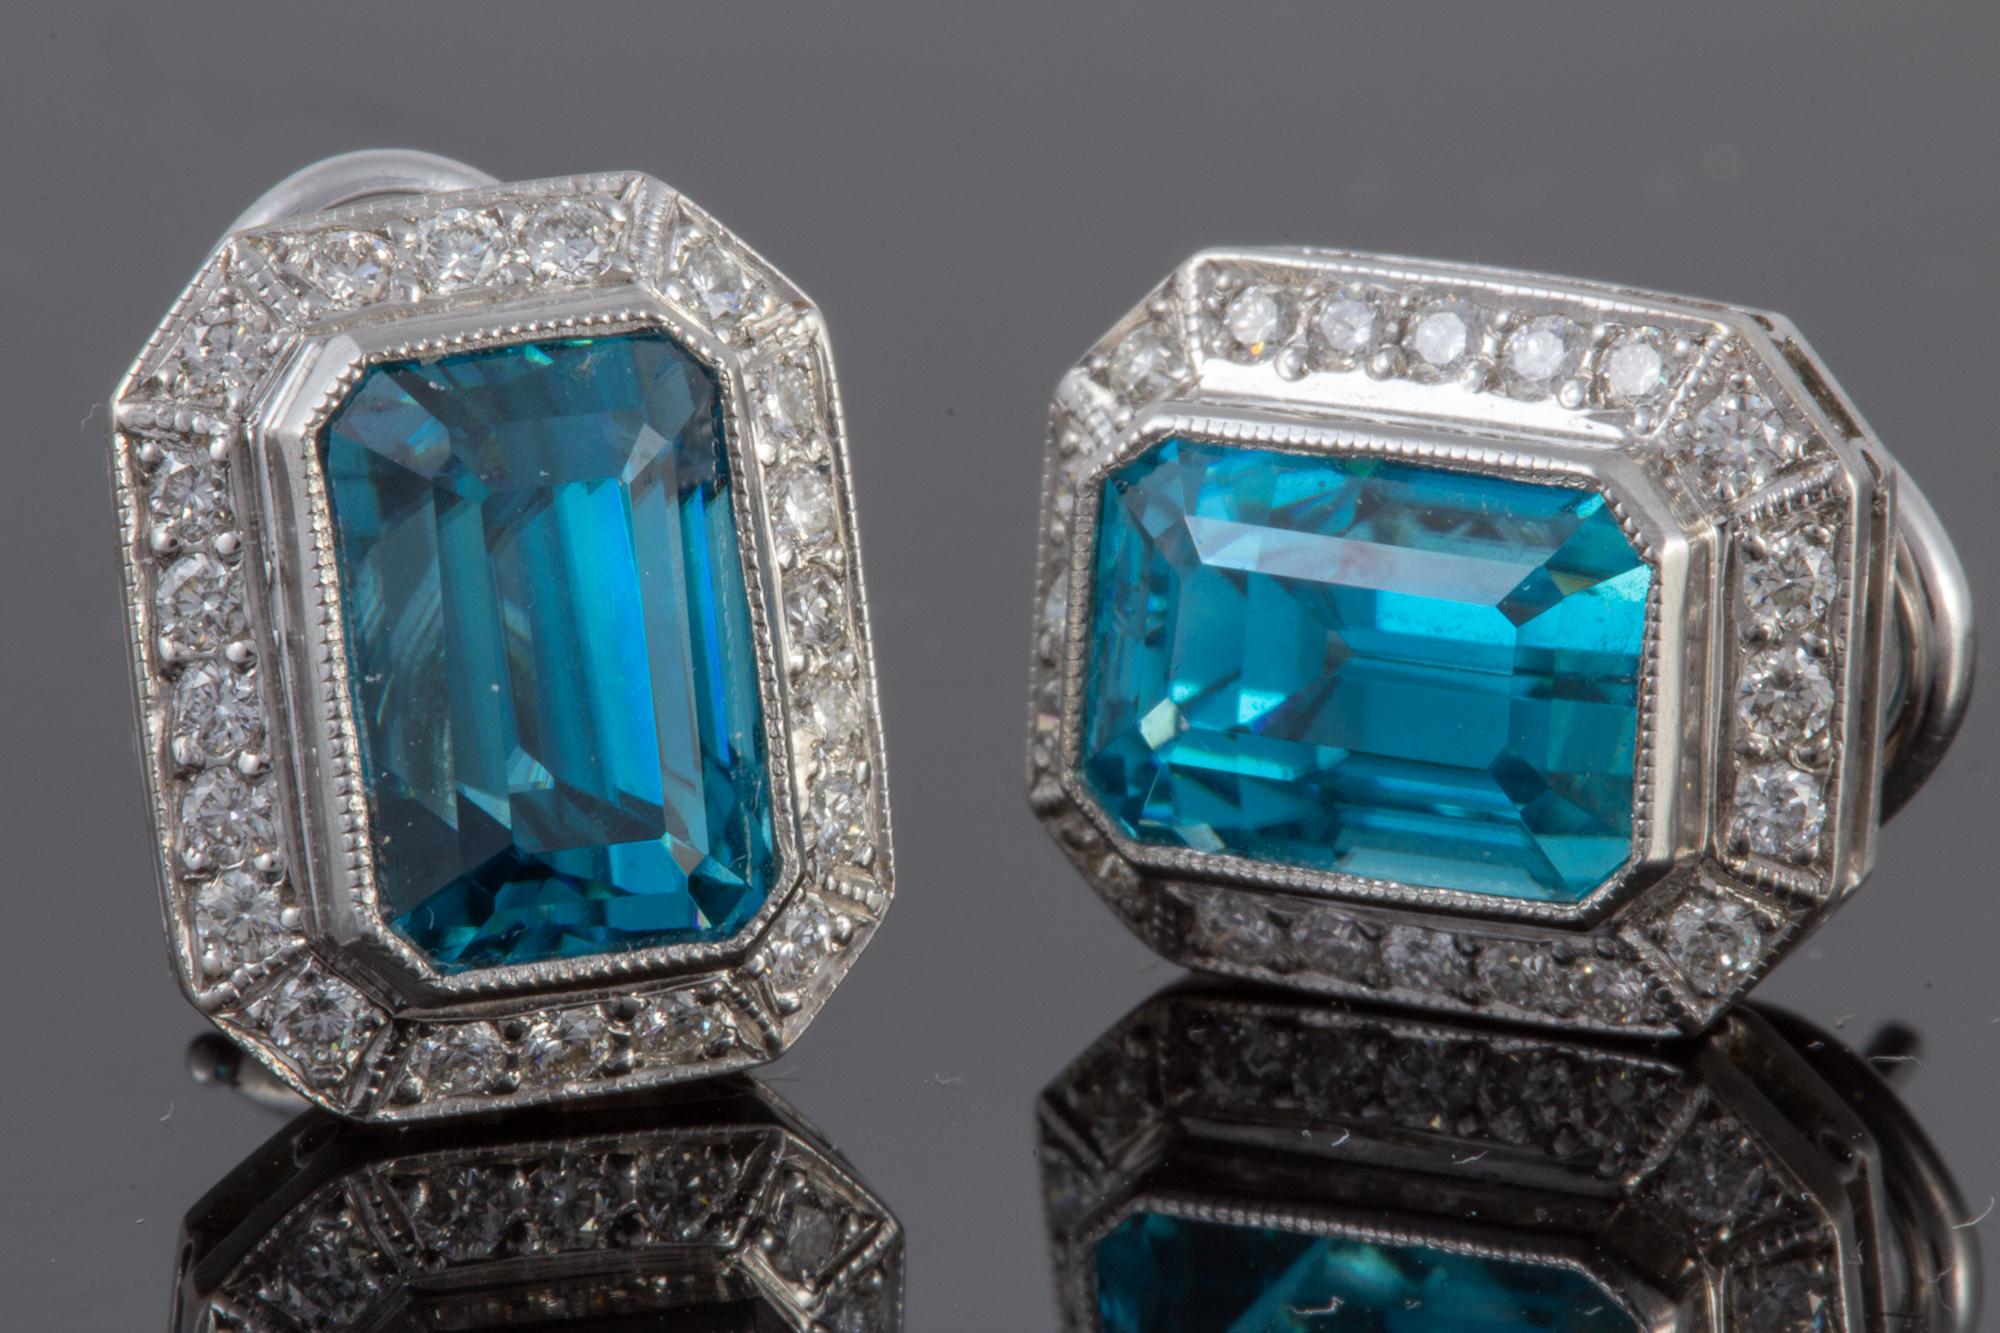 Cambodian Blue Zircon and Diamond Earrings Set in 18 Karat Gold and Platinum For Sale 1